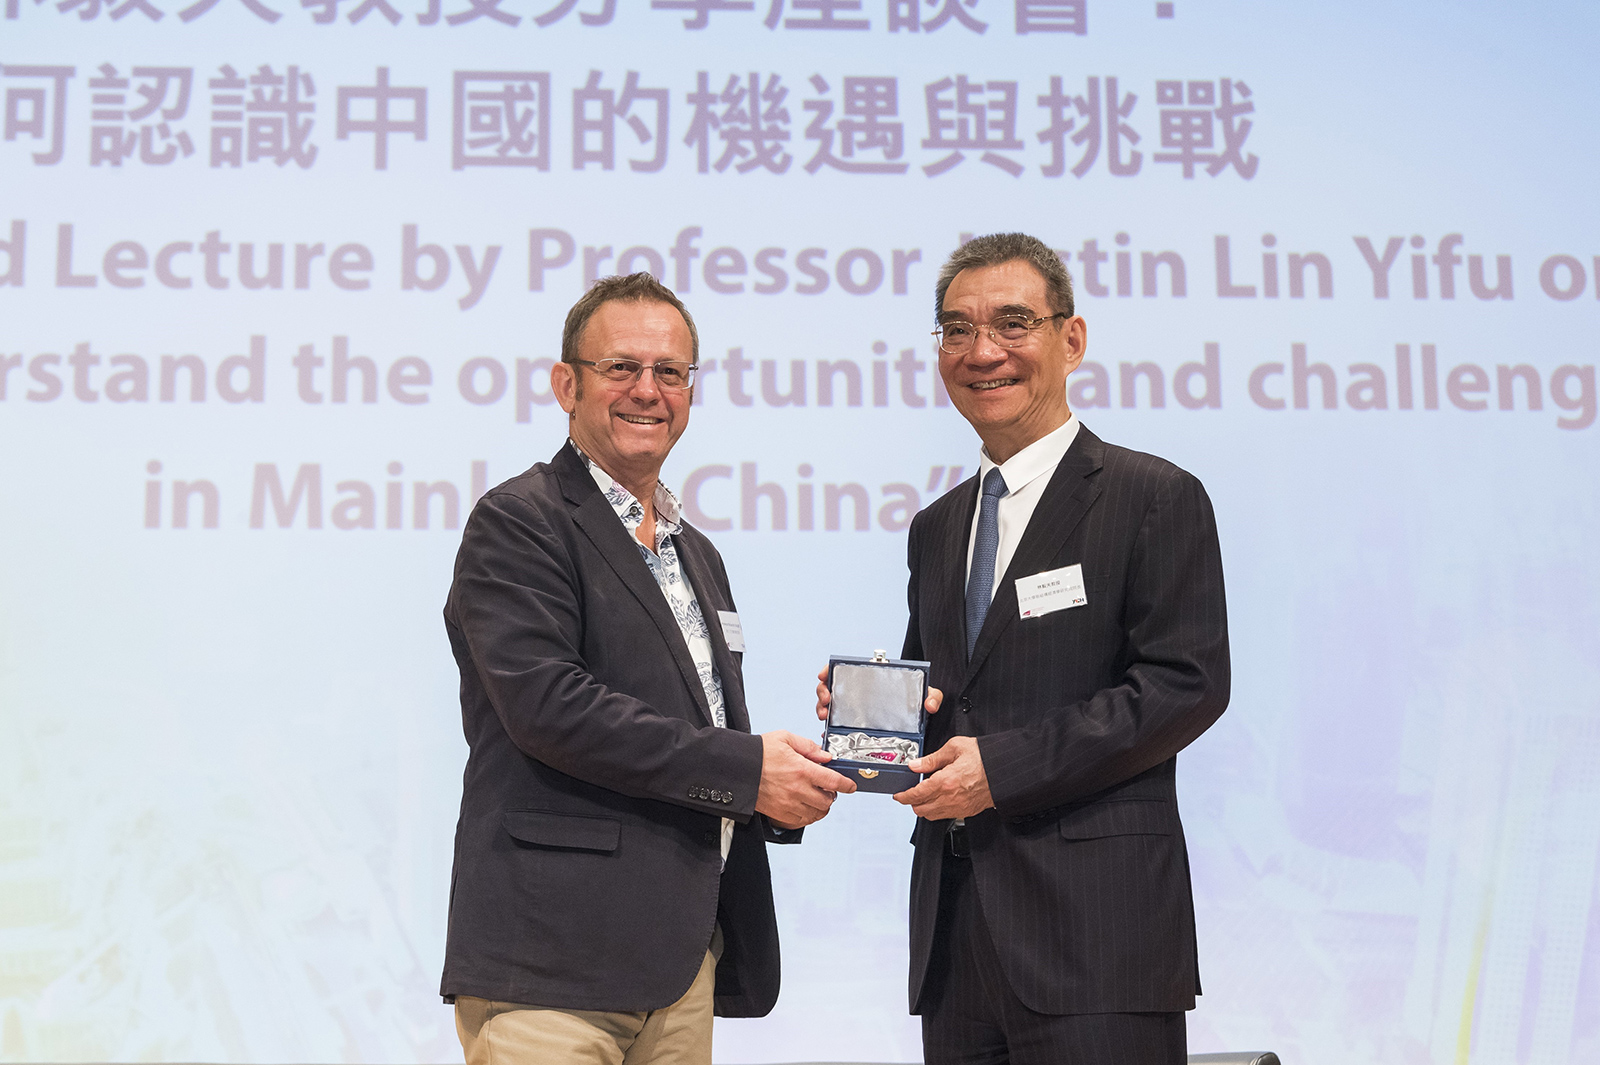 Professor Richard M. Walker (left), Dean of the College of Liberal Arts and Social Sciences, presents a commemorative gift to Professor Justin Lin Yifu (right).